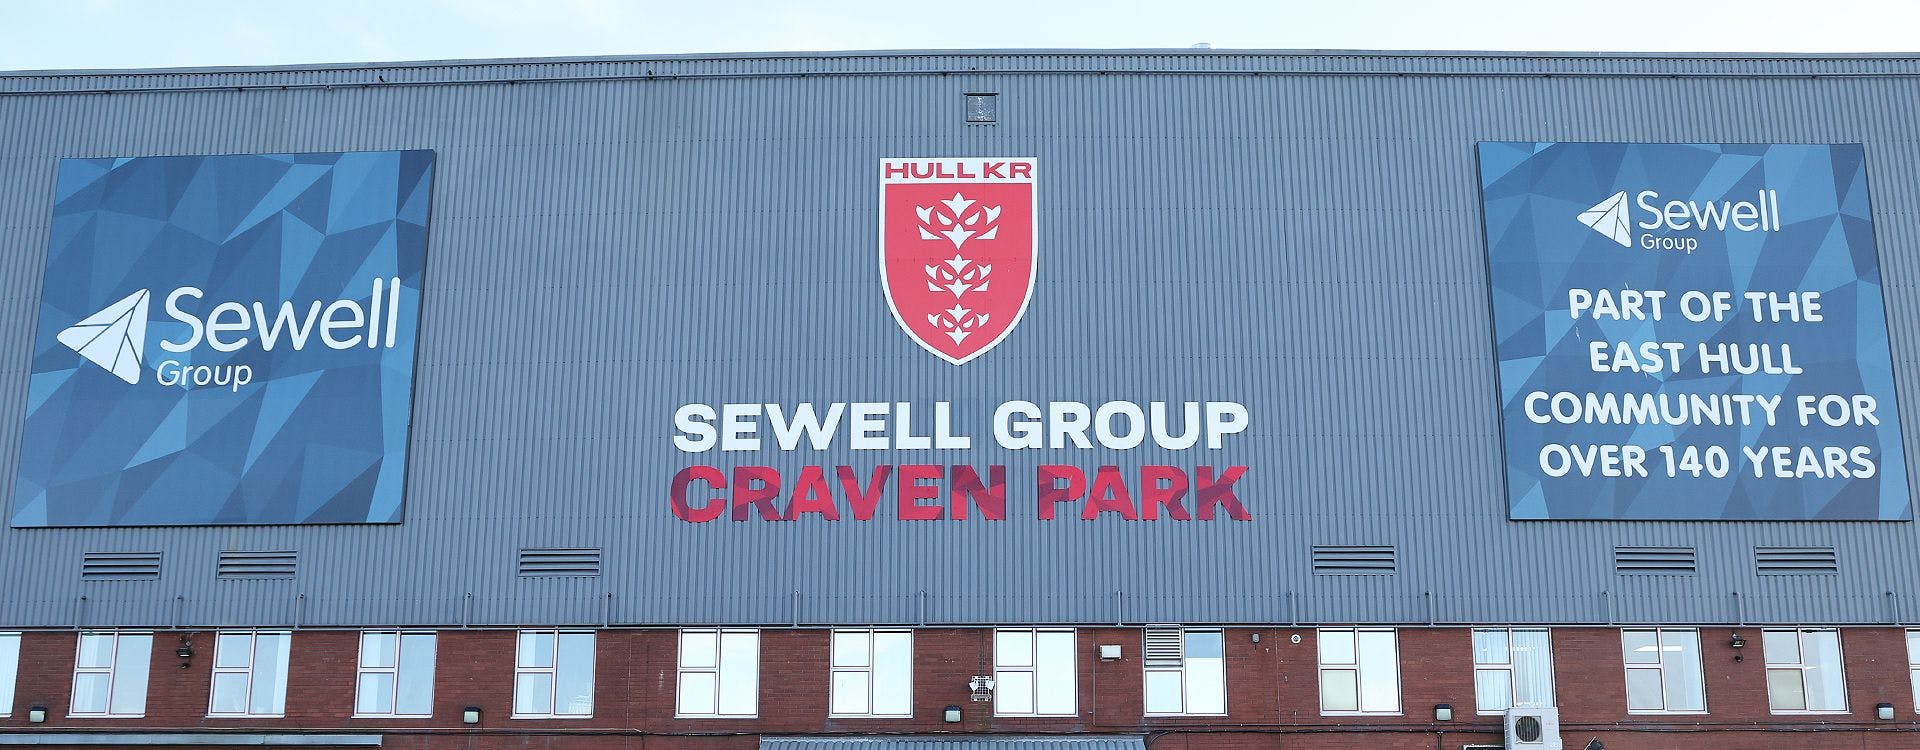 Hull KR and Sewell Group announce new multi-year stadium partnership extension